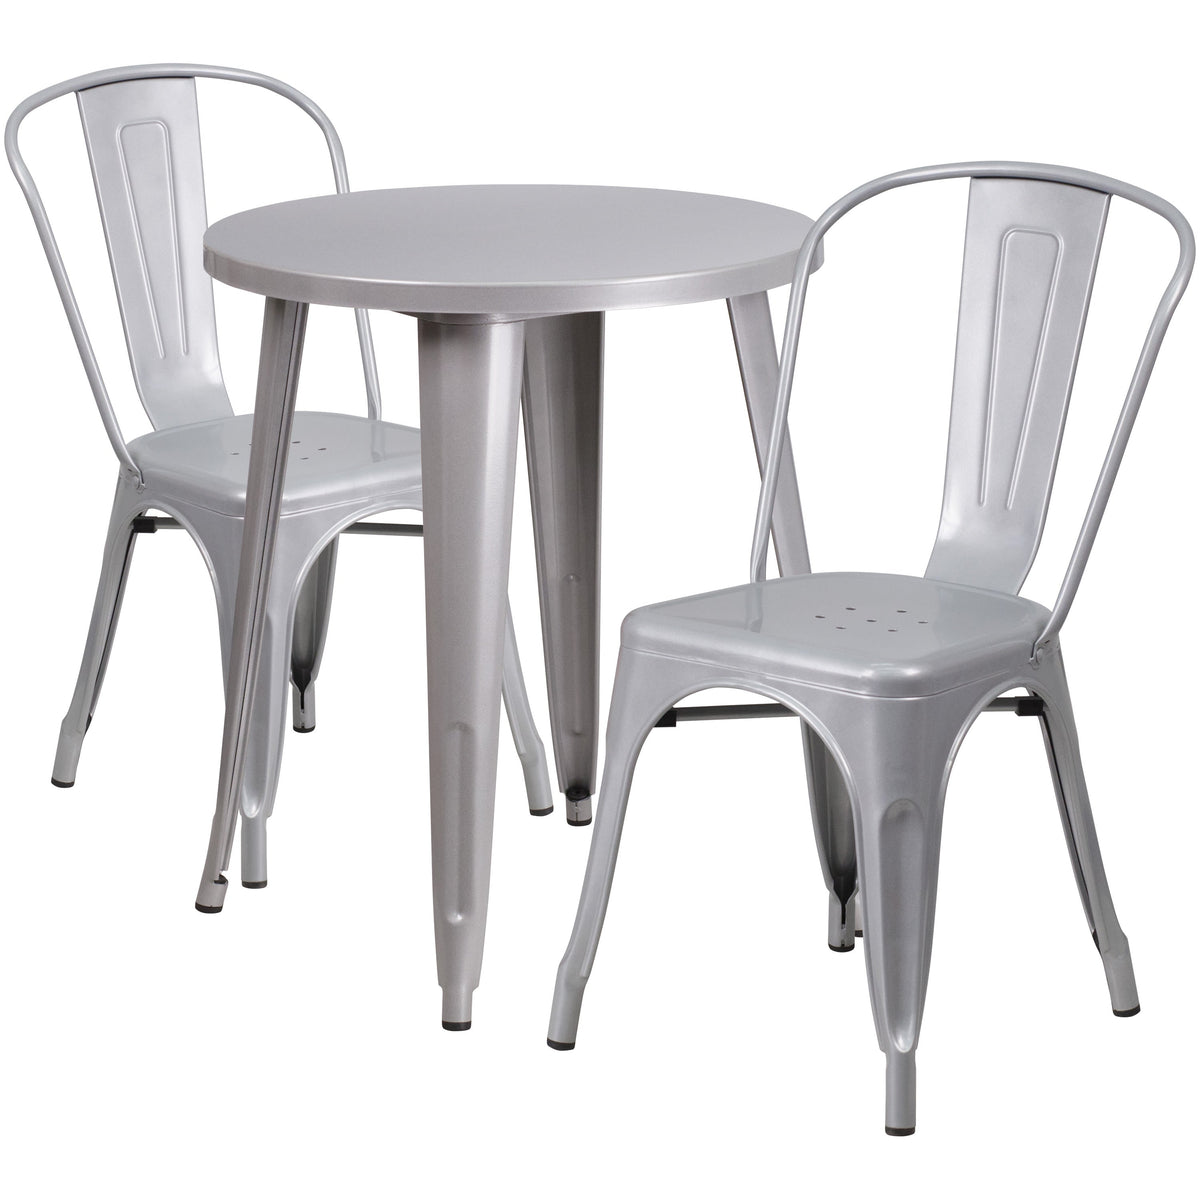 Silver |#| 24inch Round Silver Metal Indoor-Outdoor Table Set with 2 Cafe Chairs - Patio Set